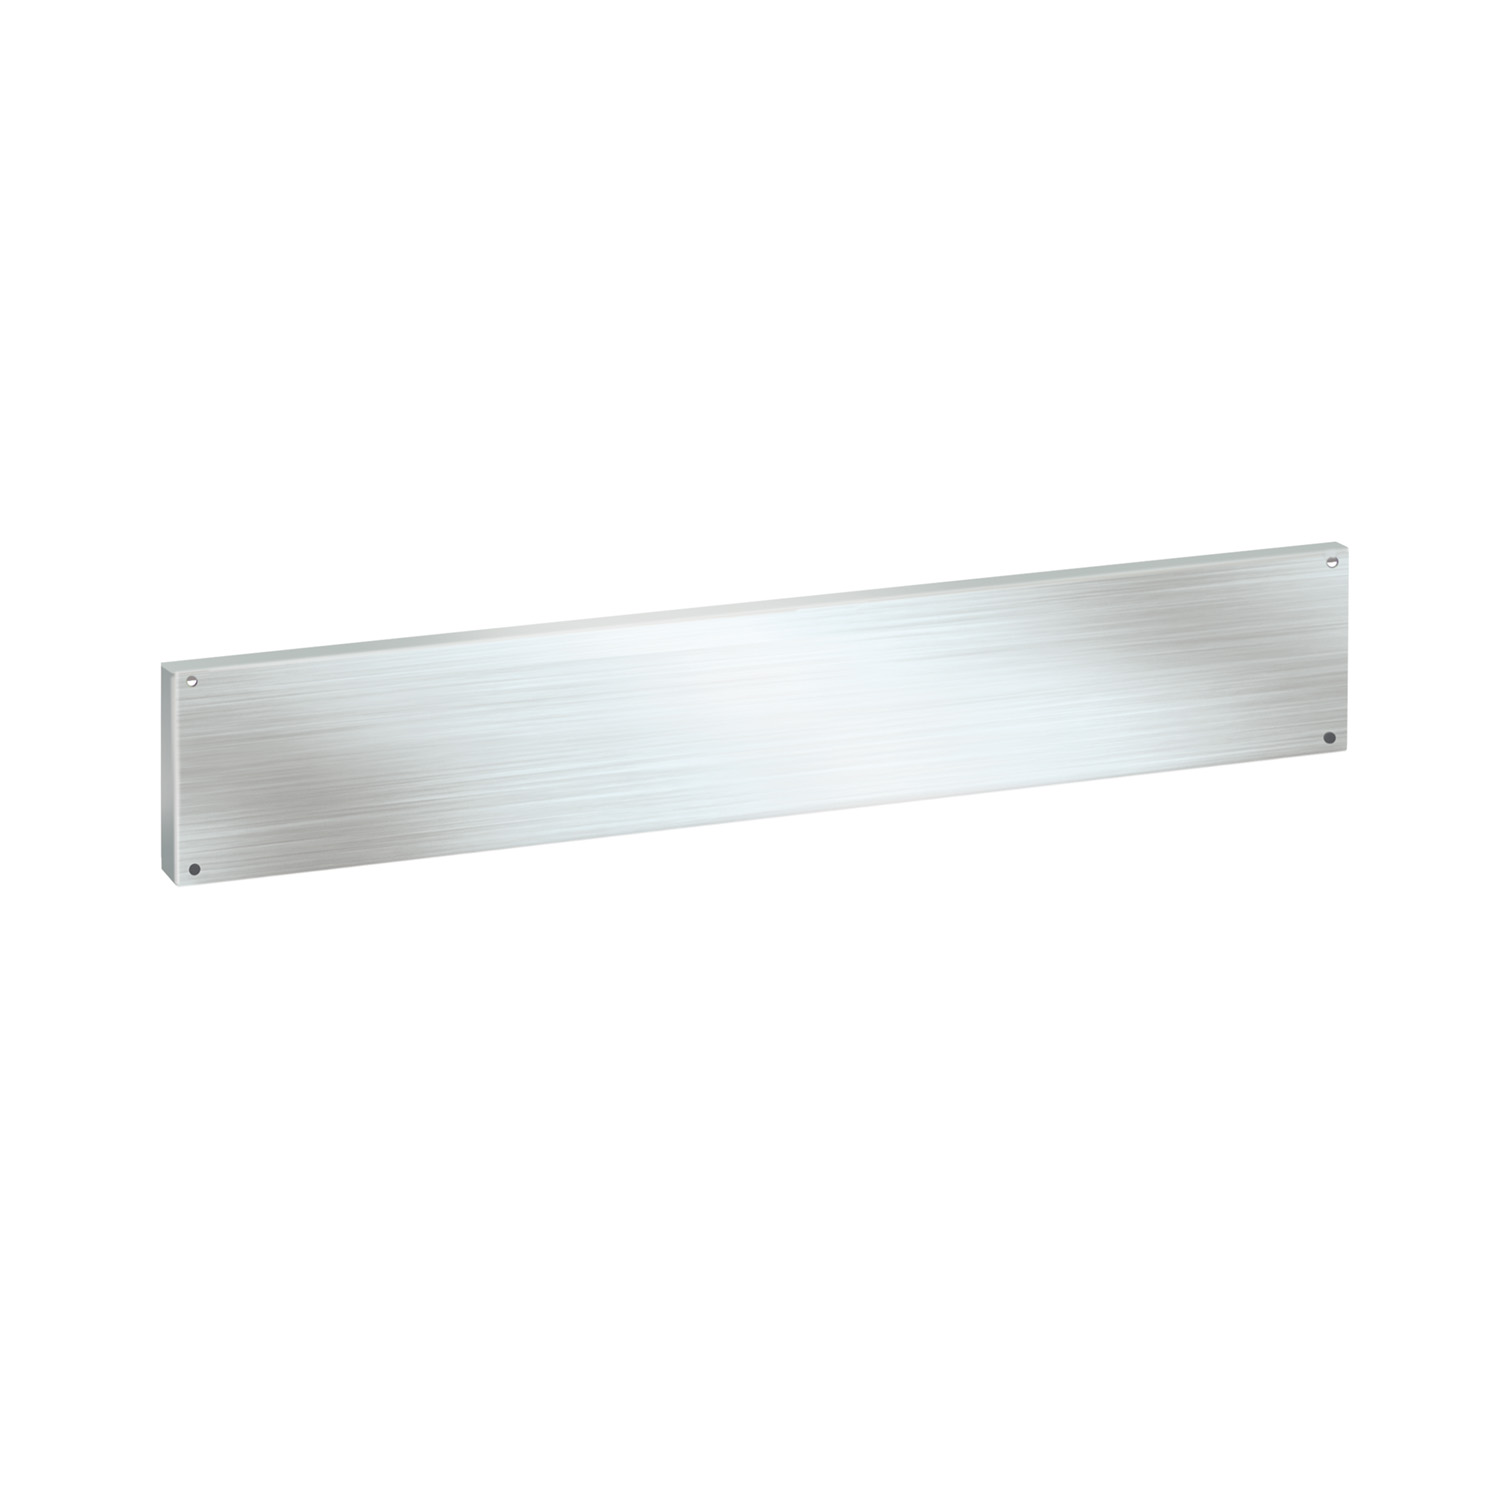 Stainless steel back panel (160 x 1200mm)